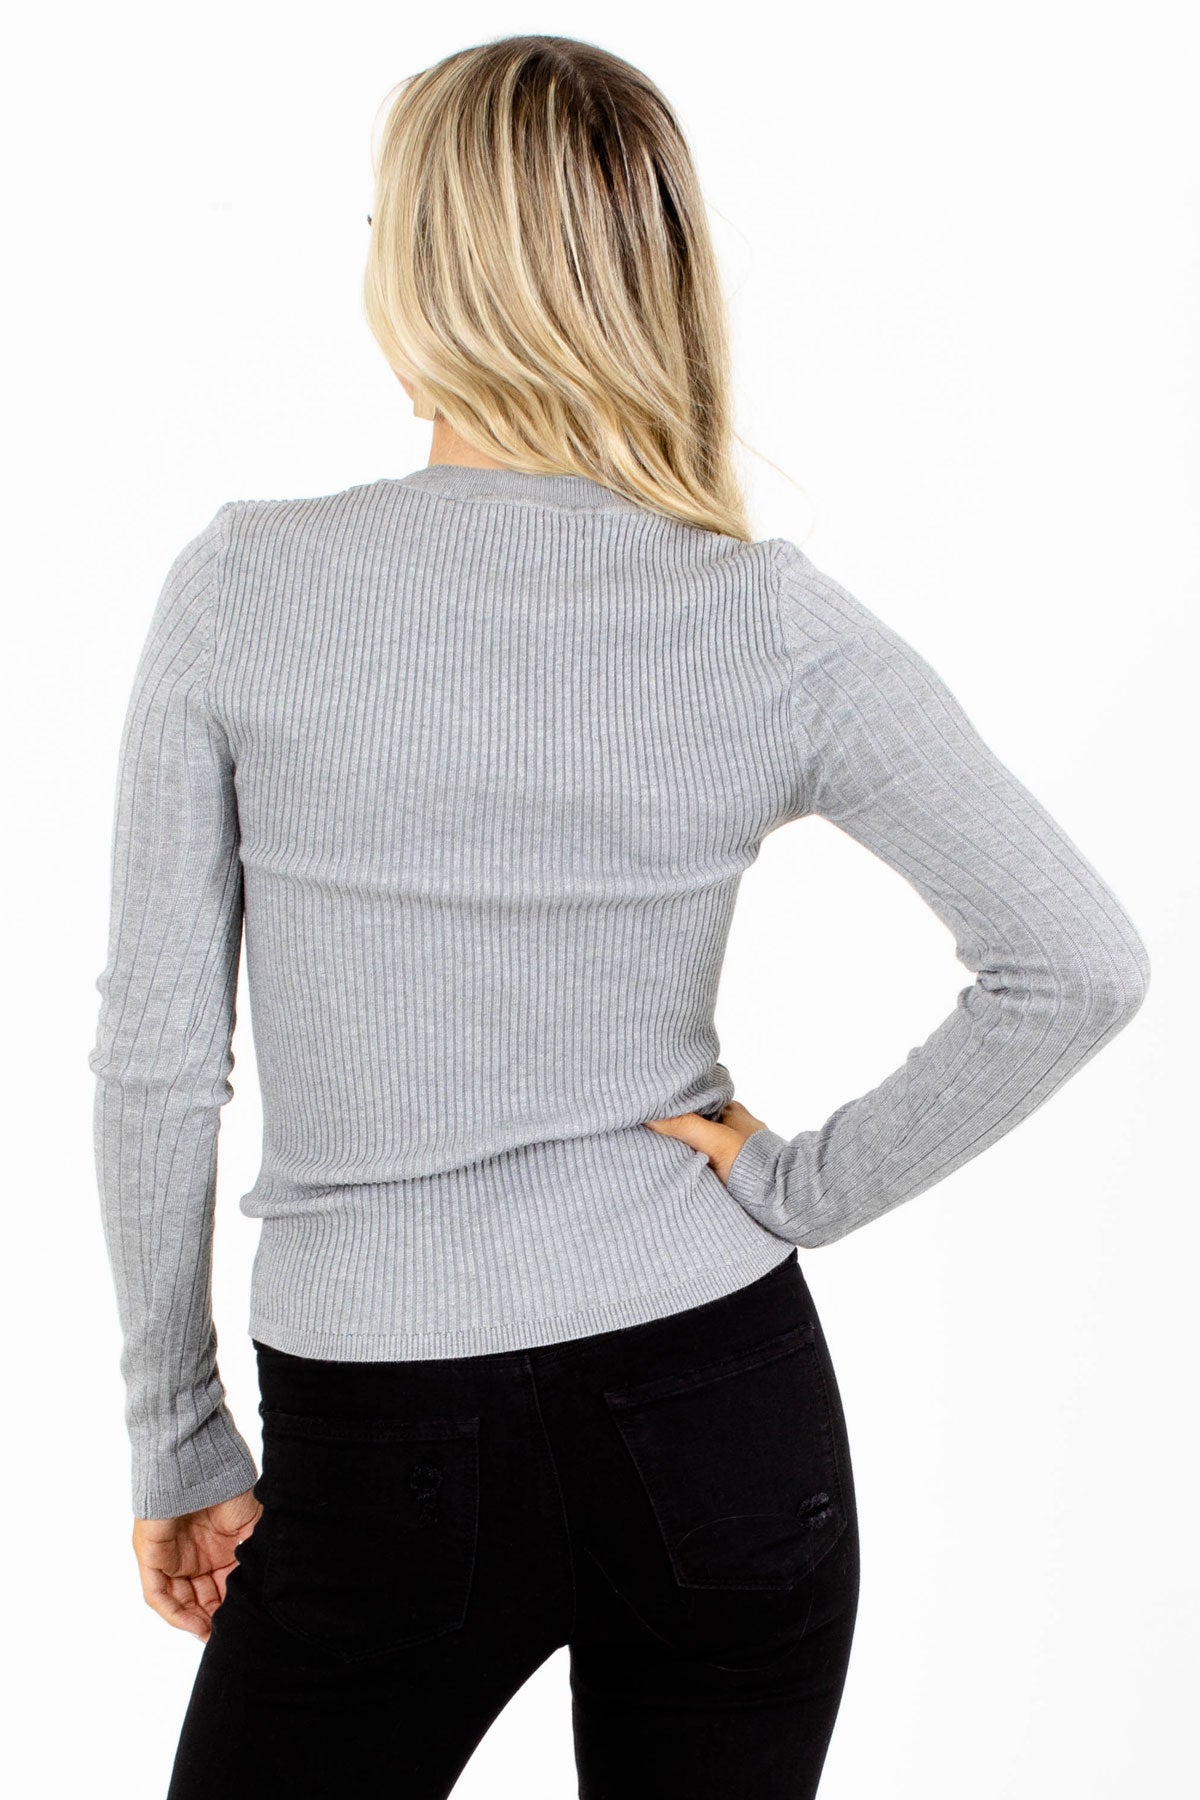 Women's Gray Knit Material Boutique Top